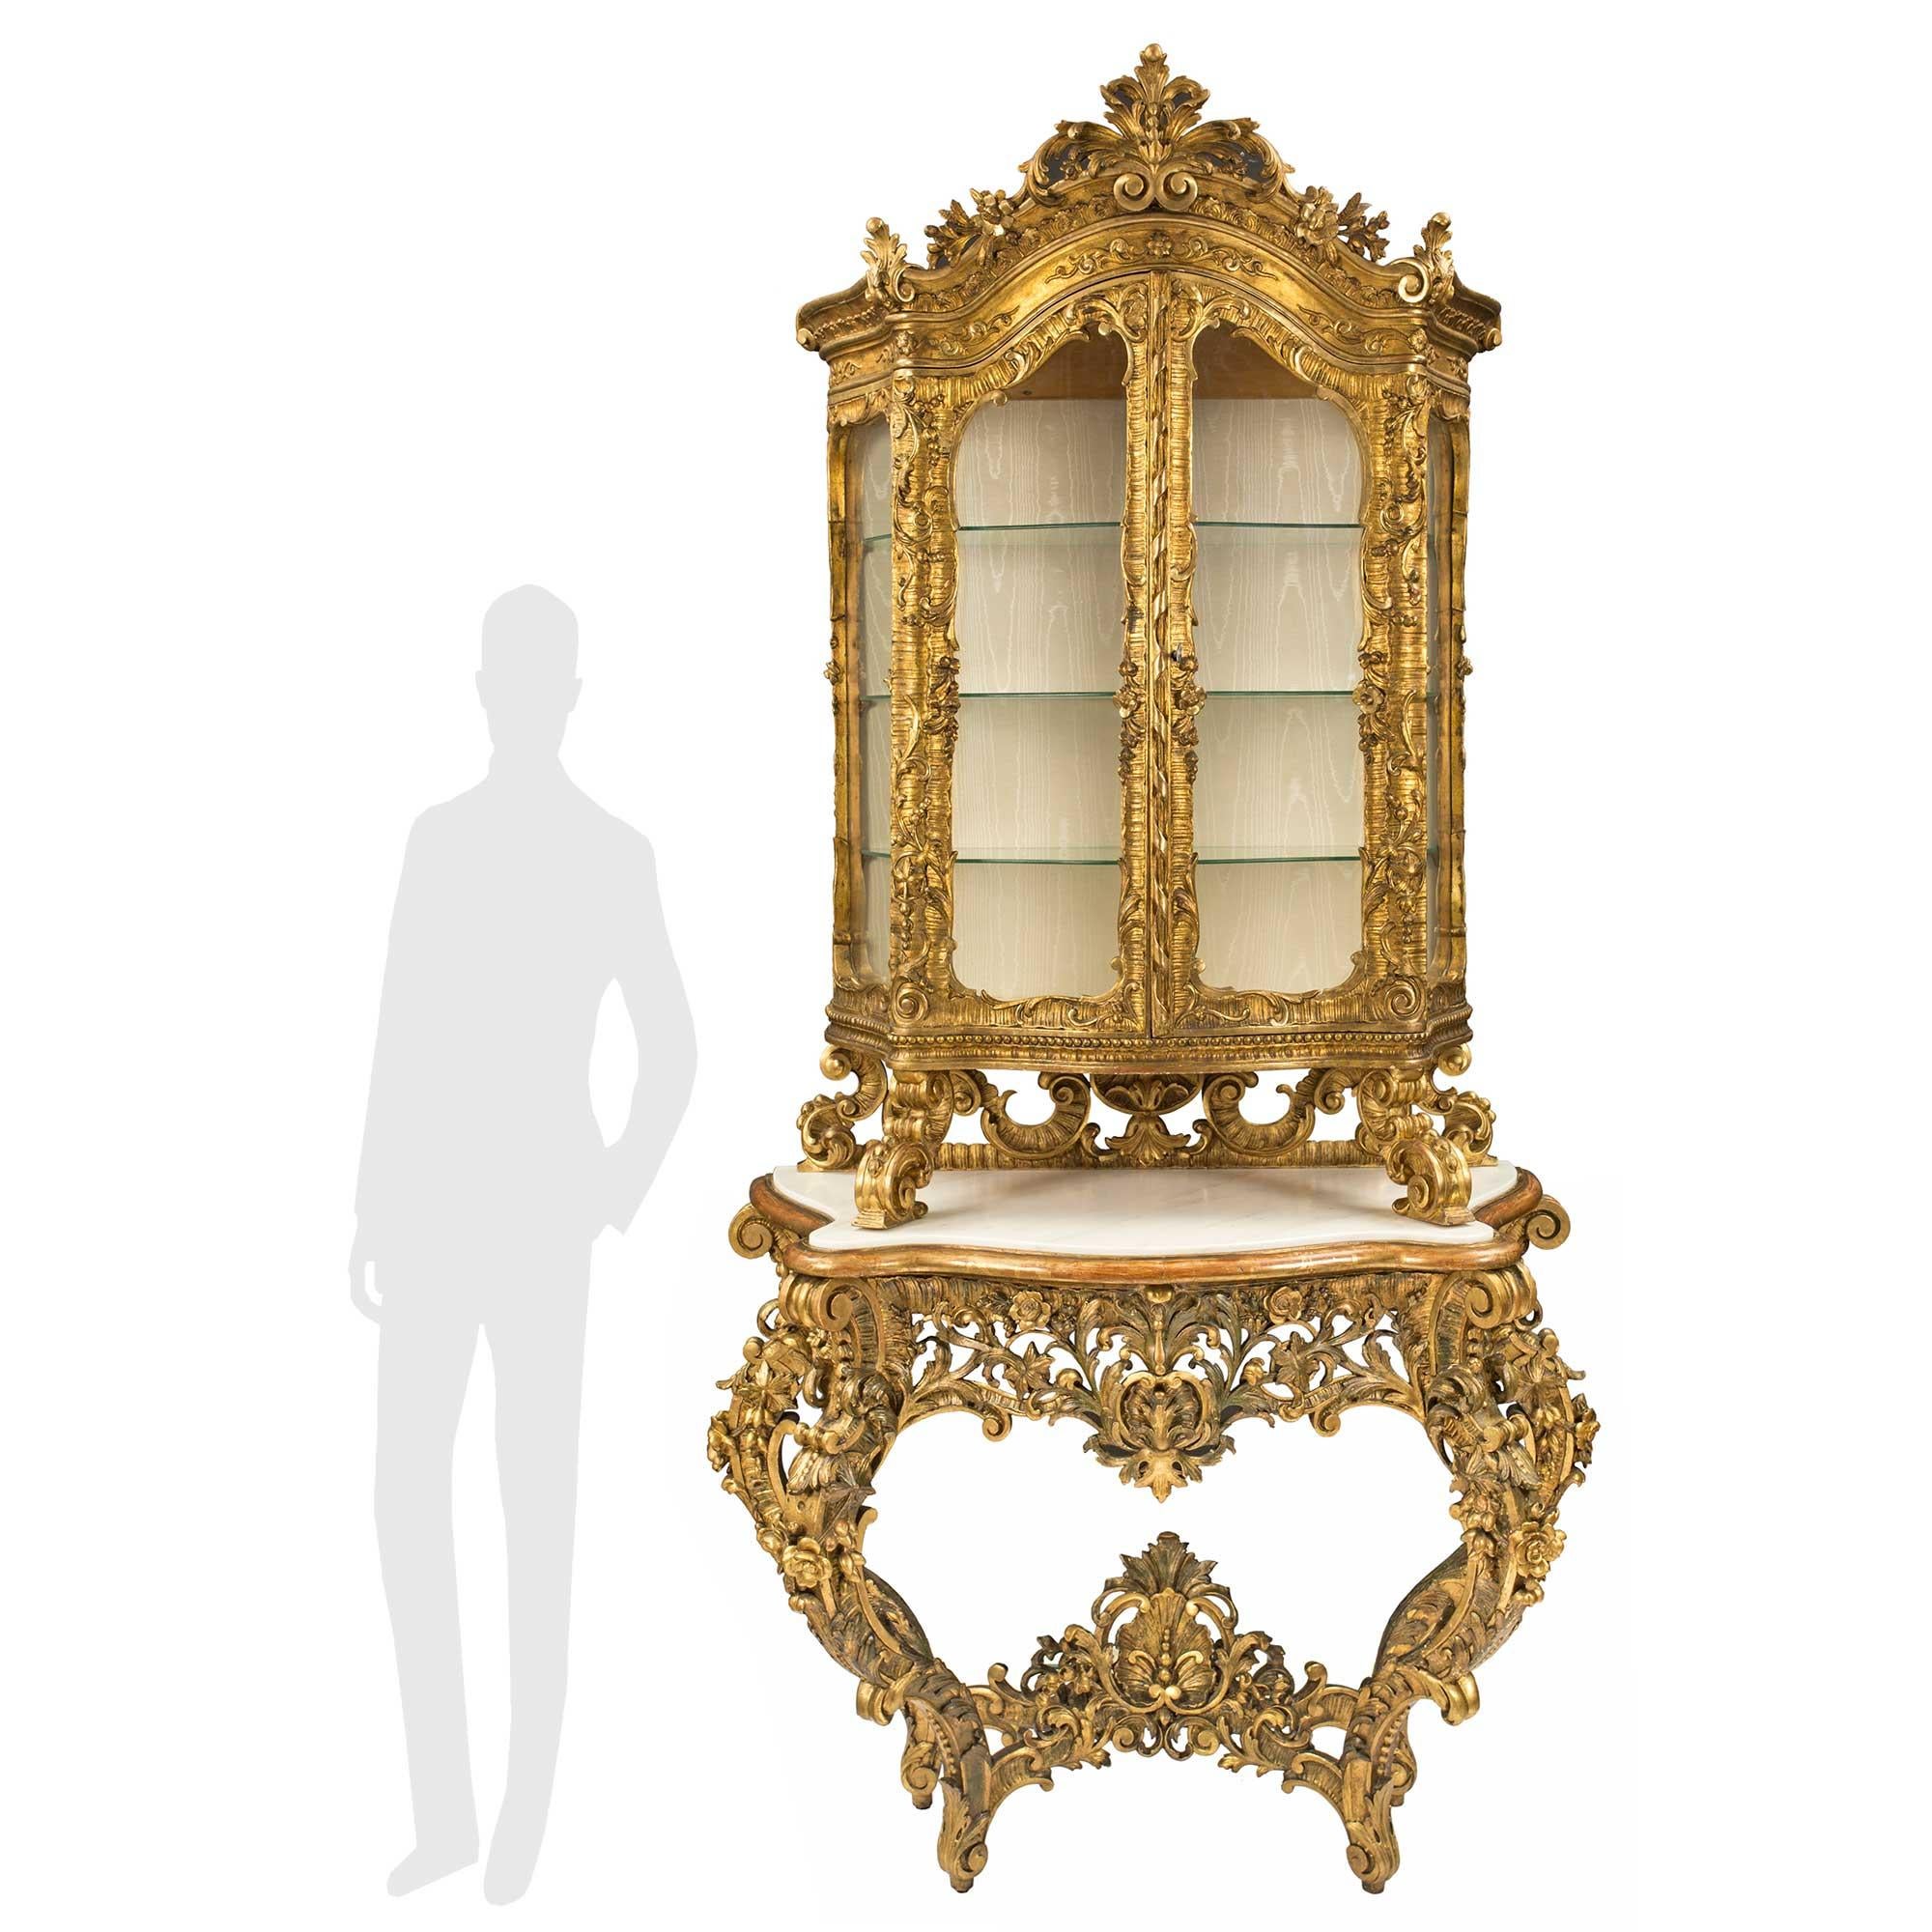 A magnificent Italian 18th century giltwood, polychrome and white Carrara marble Baroque console vitrine from the Piedmont region. This unique and extremely decorative console is raised by stunning cabriole legs with richly carved lavish scrolled